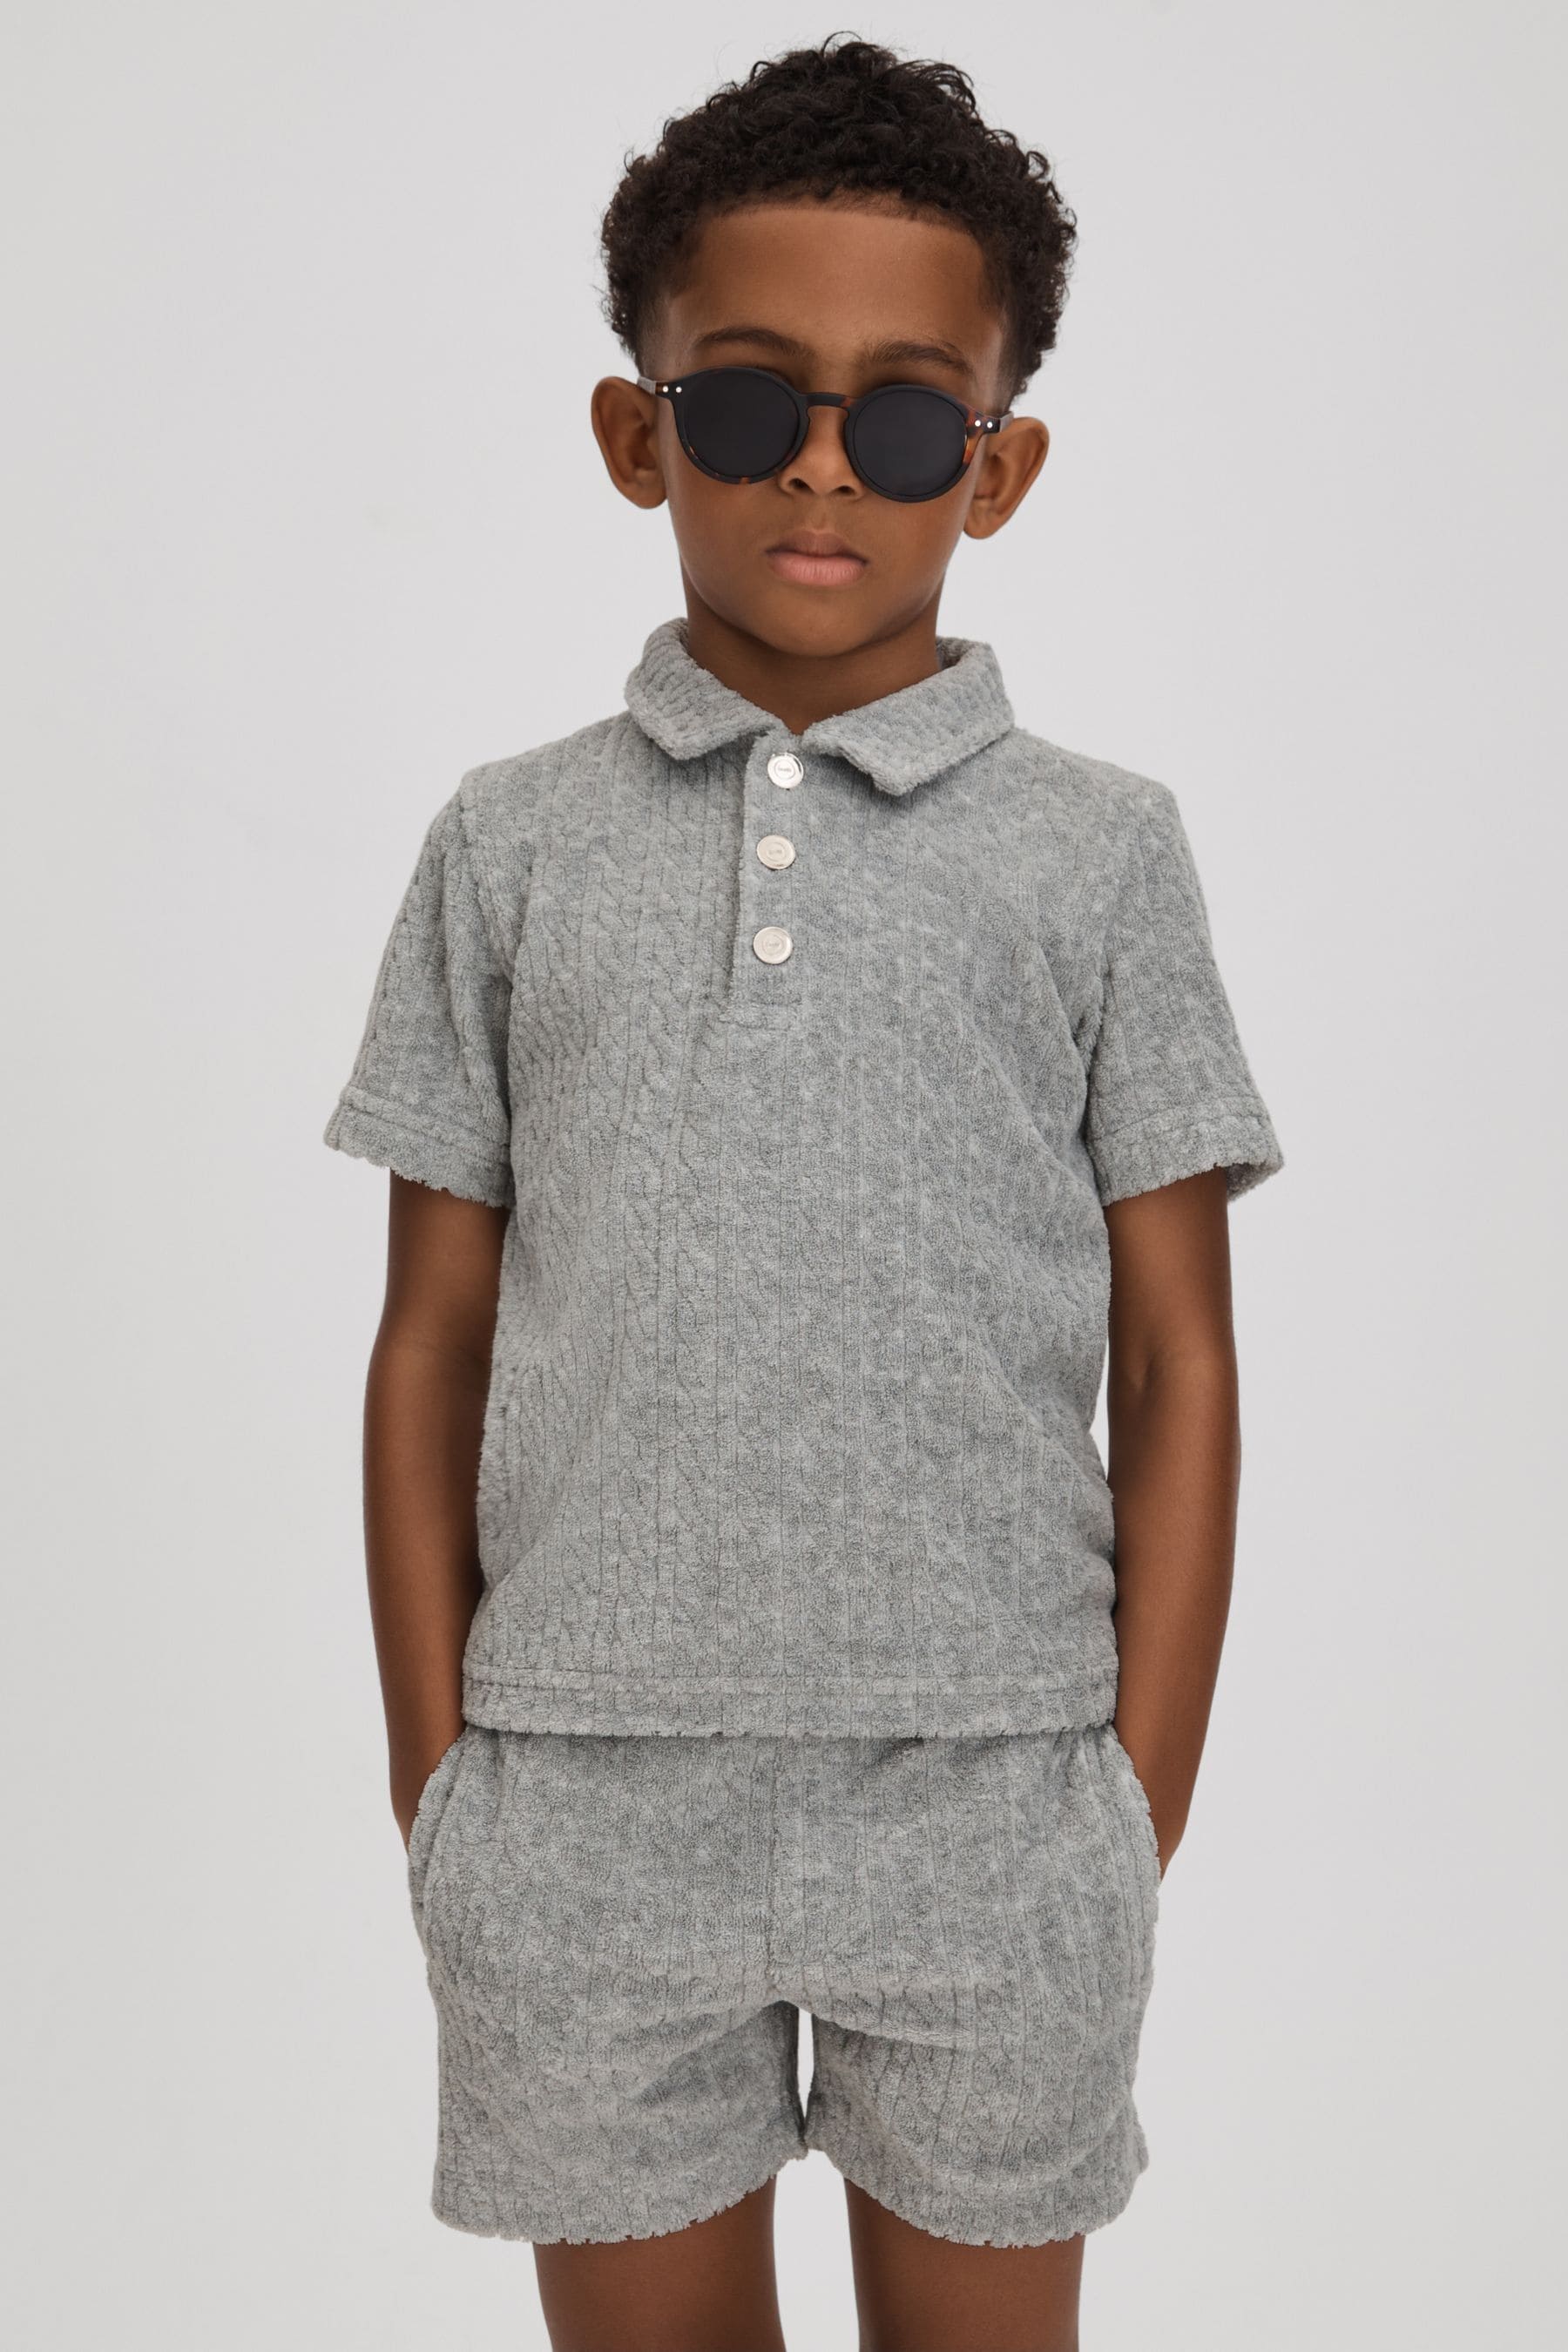 Reiss Iggy - Soft Grey Towelling Polo Shirt, Age 6-7 Years